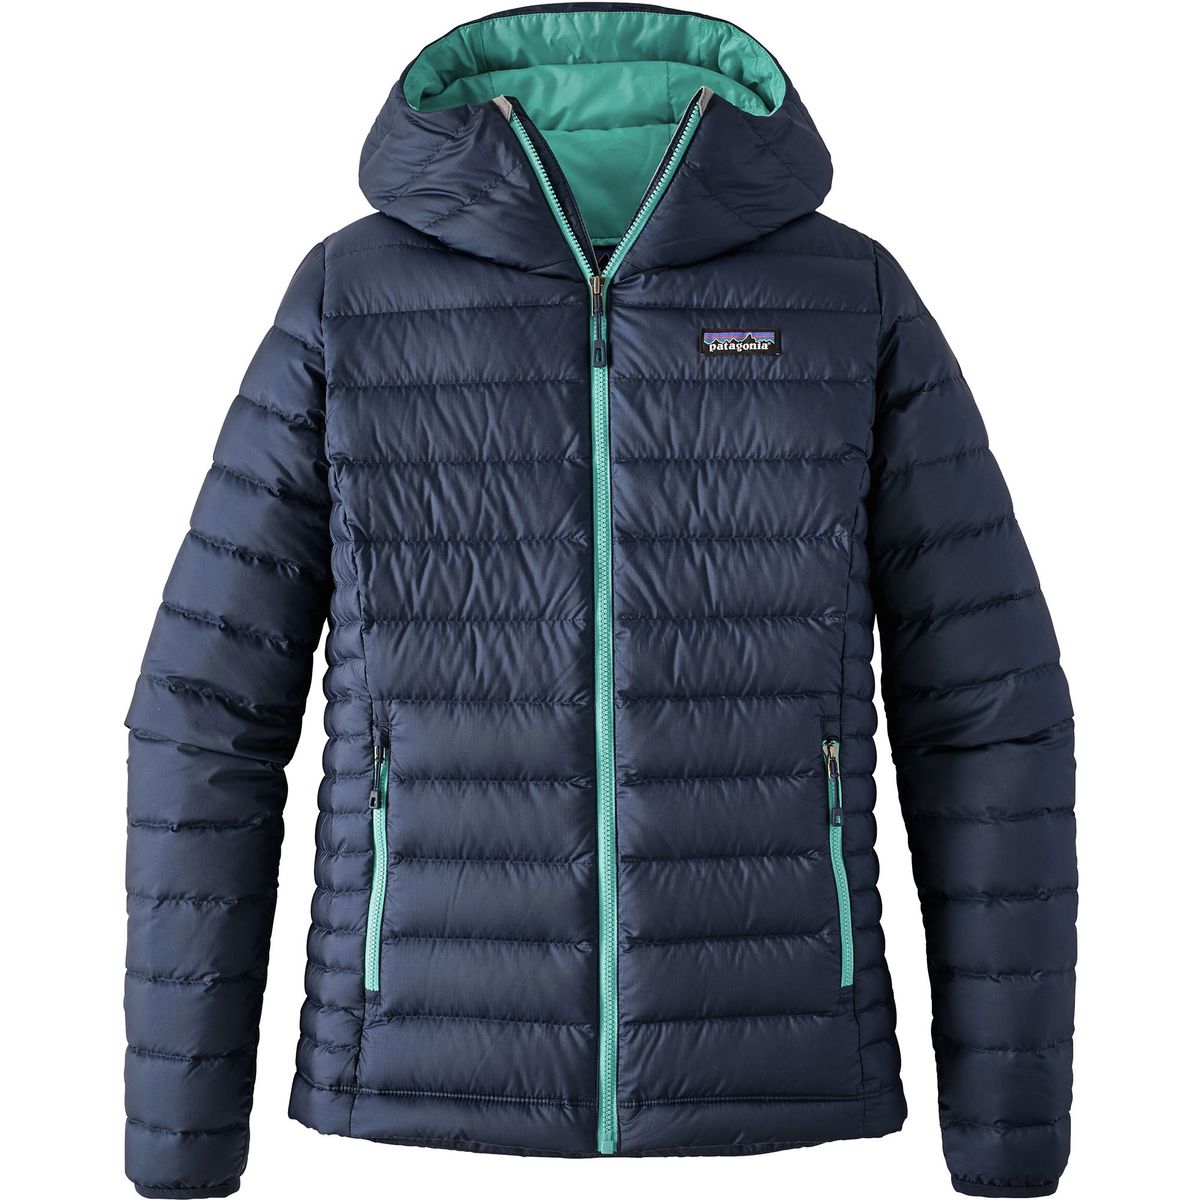 Patagonia Down Sweater Full-Zip Hooded Jacket - Women's | Backcountry.com